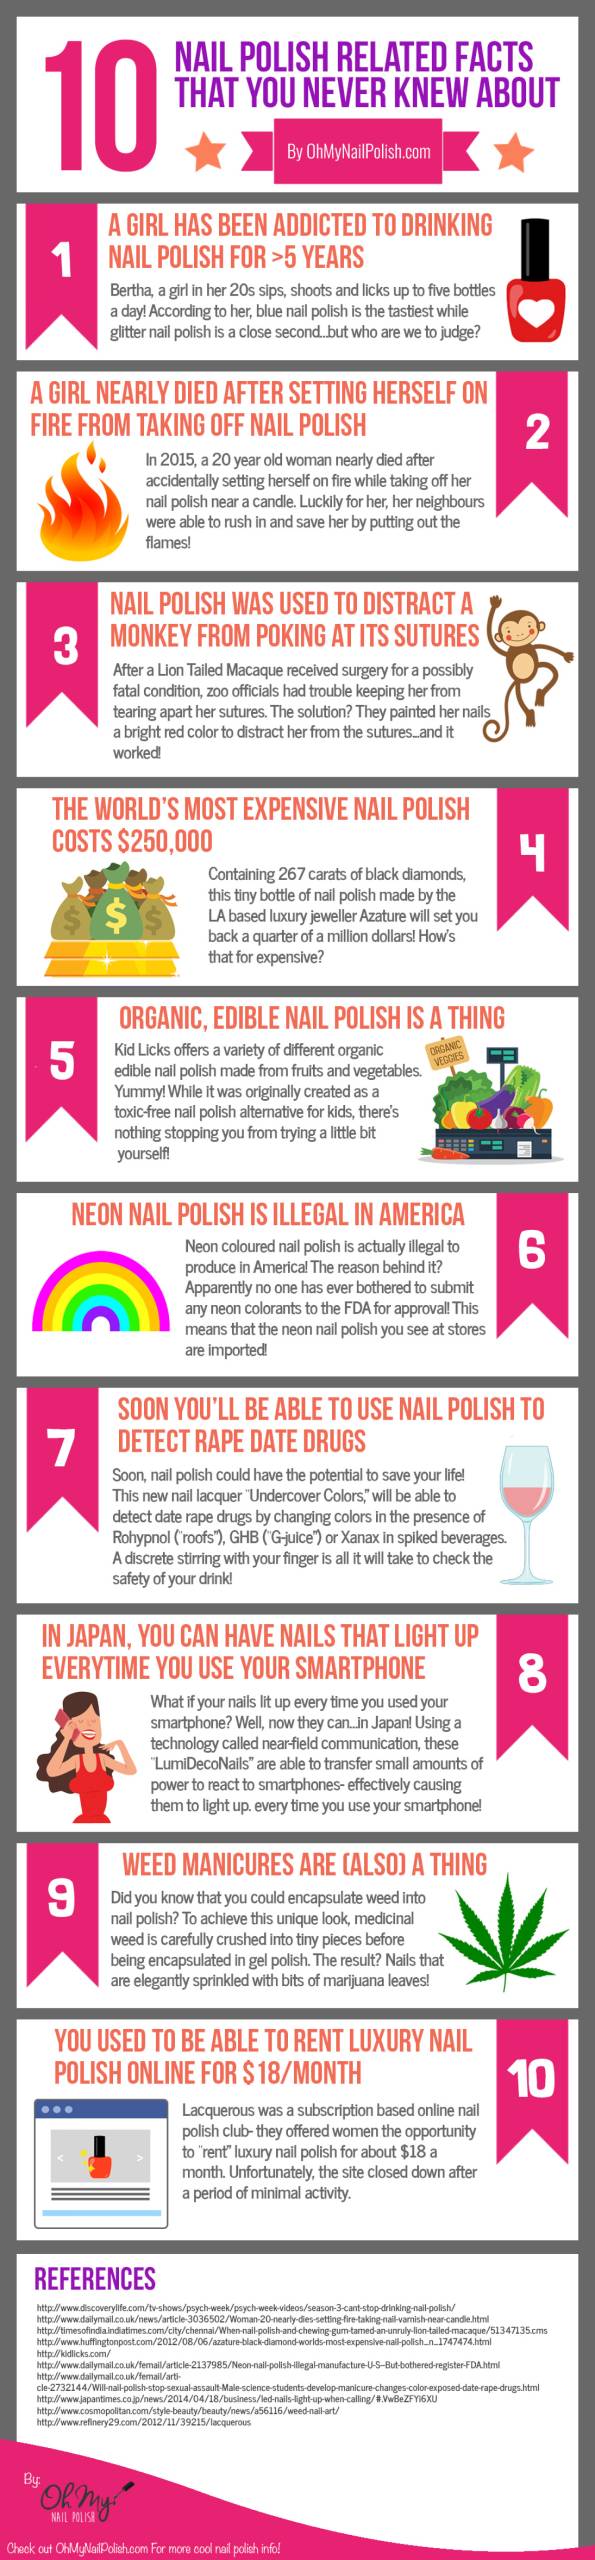 nail art interesting facts infographic for history of liverpool nail art article